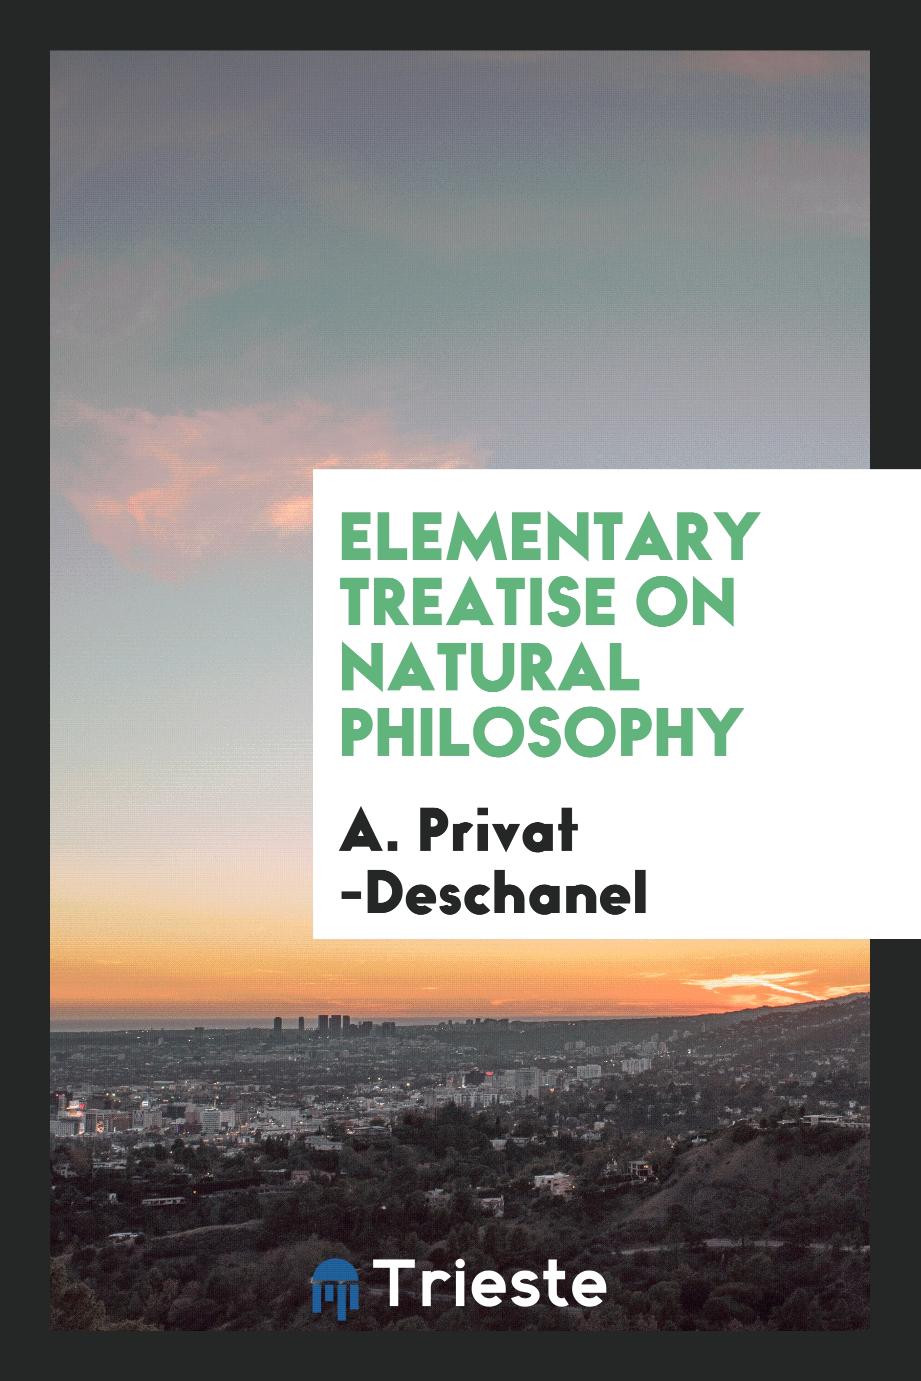 A. Privat Deschanel - Elementary Treatise on Natural Philosophy